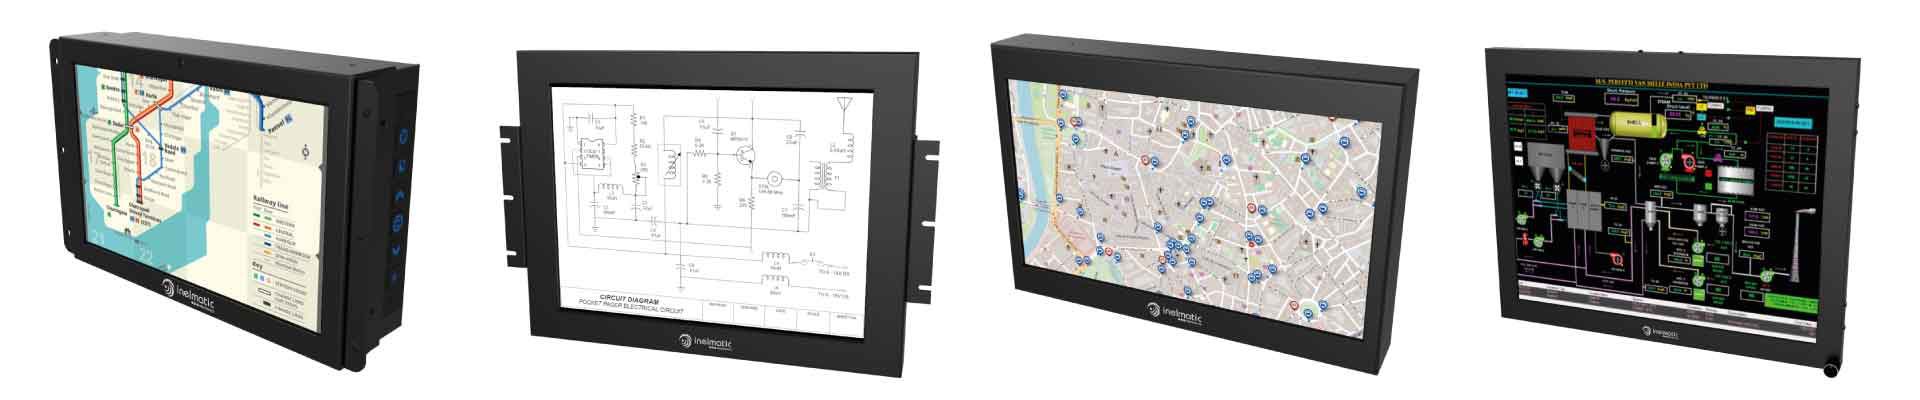 Rugged metal frame displays for industrial integration - Inelmatic